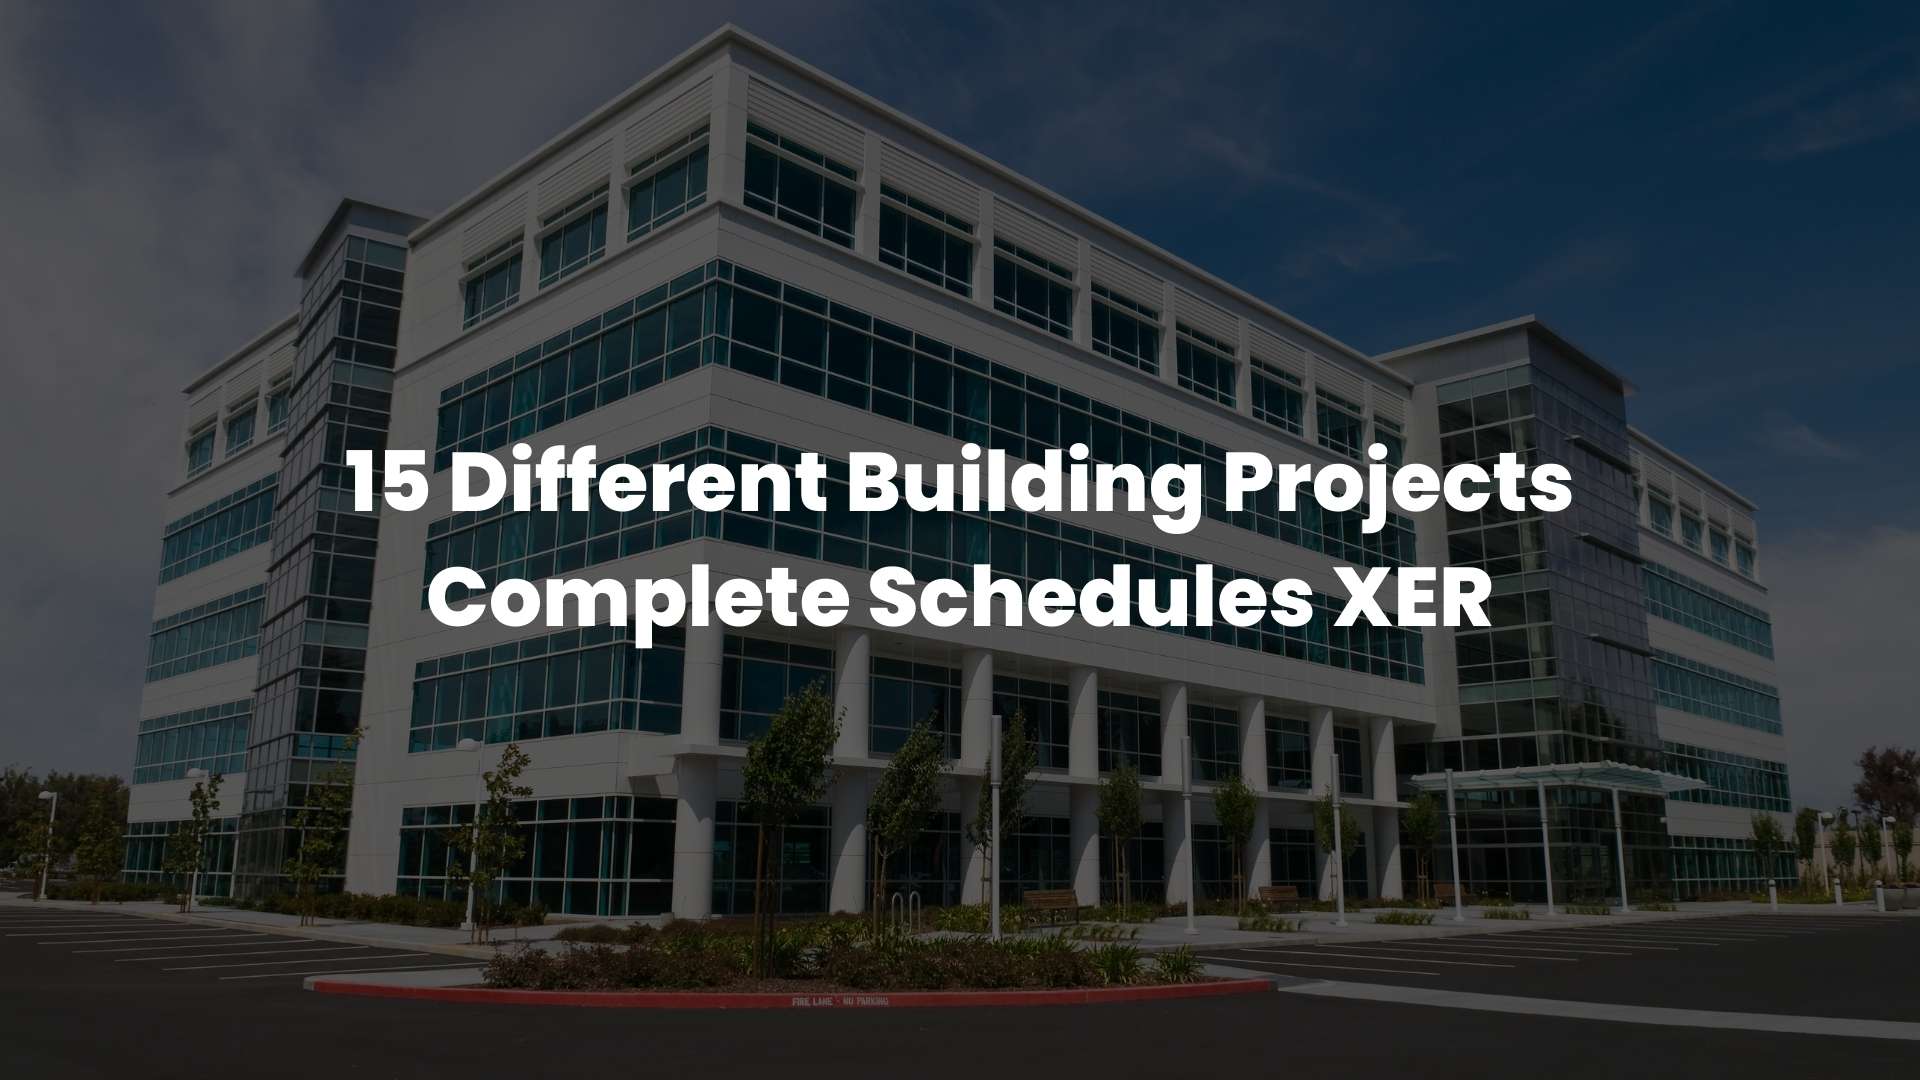 15 Different Building Projects Complete Schedules XER